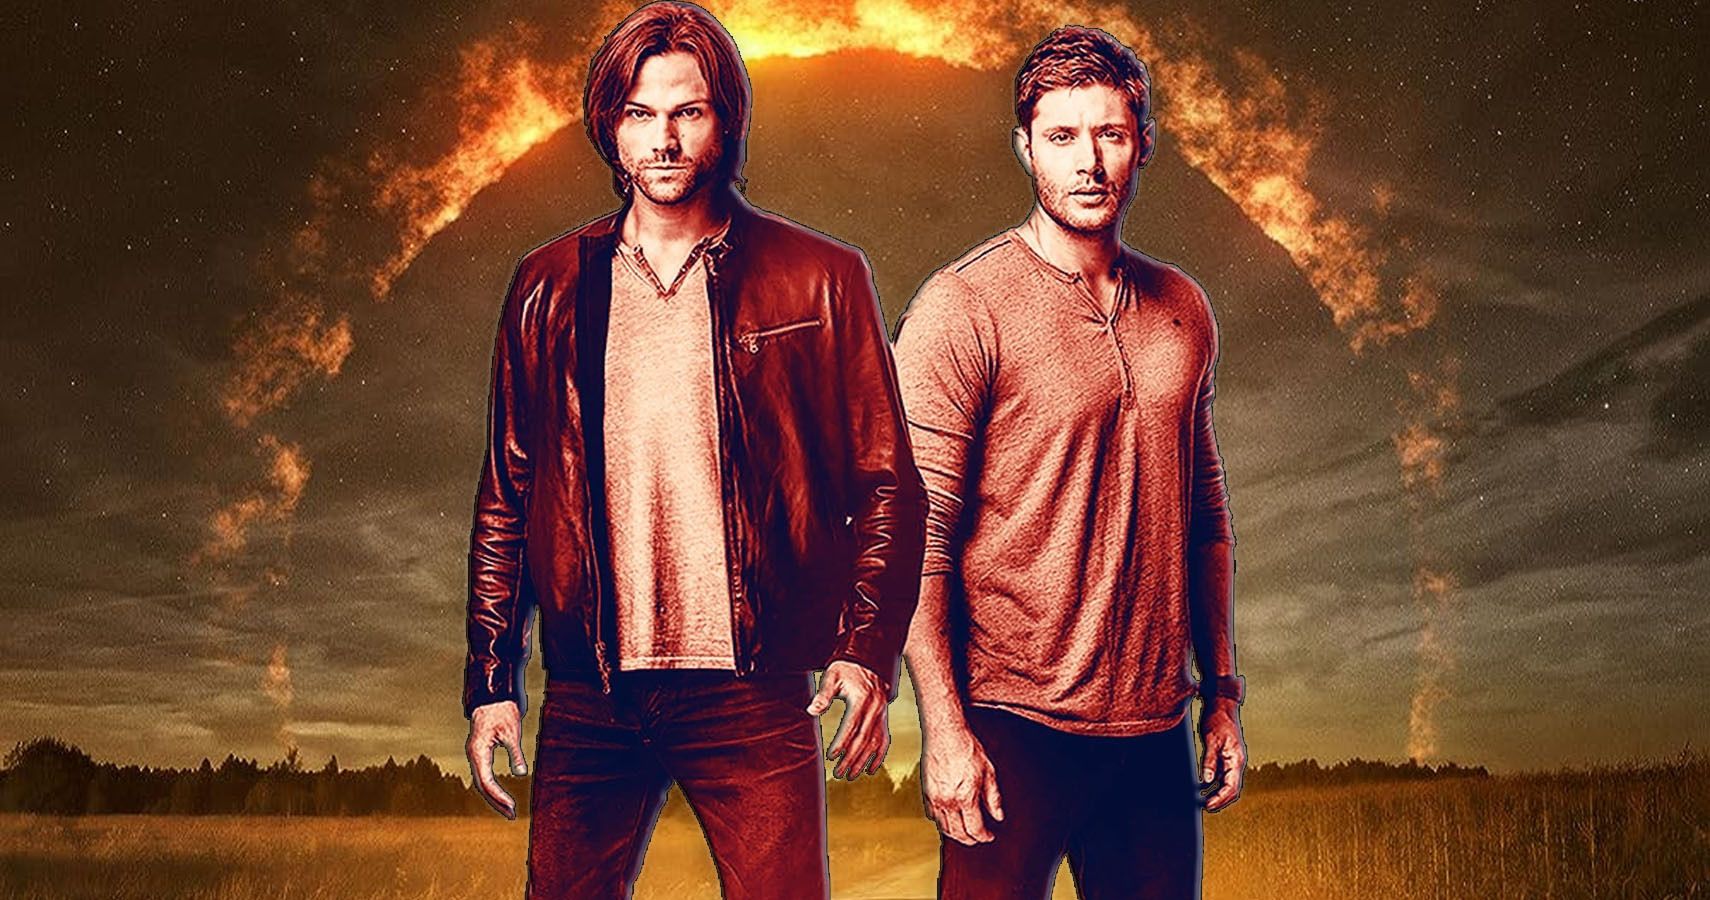 Sam and Dean Winchester staring at the reader against a backdrop of Supernatural's final season poster